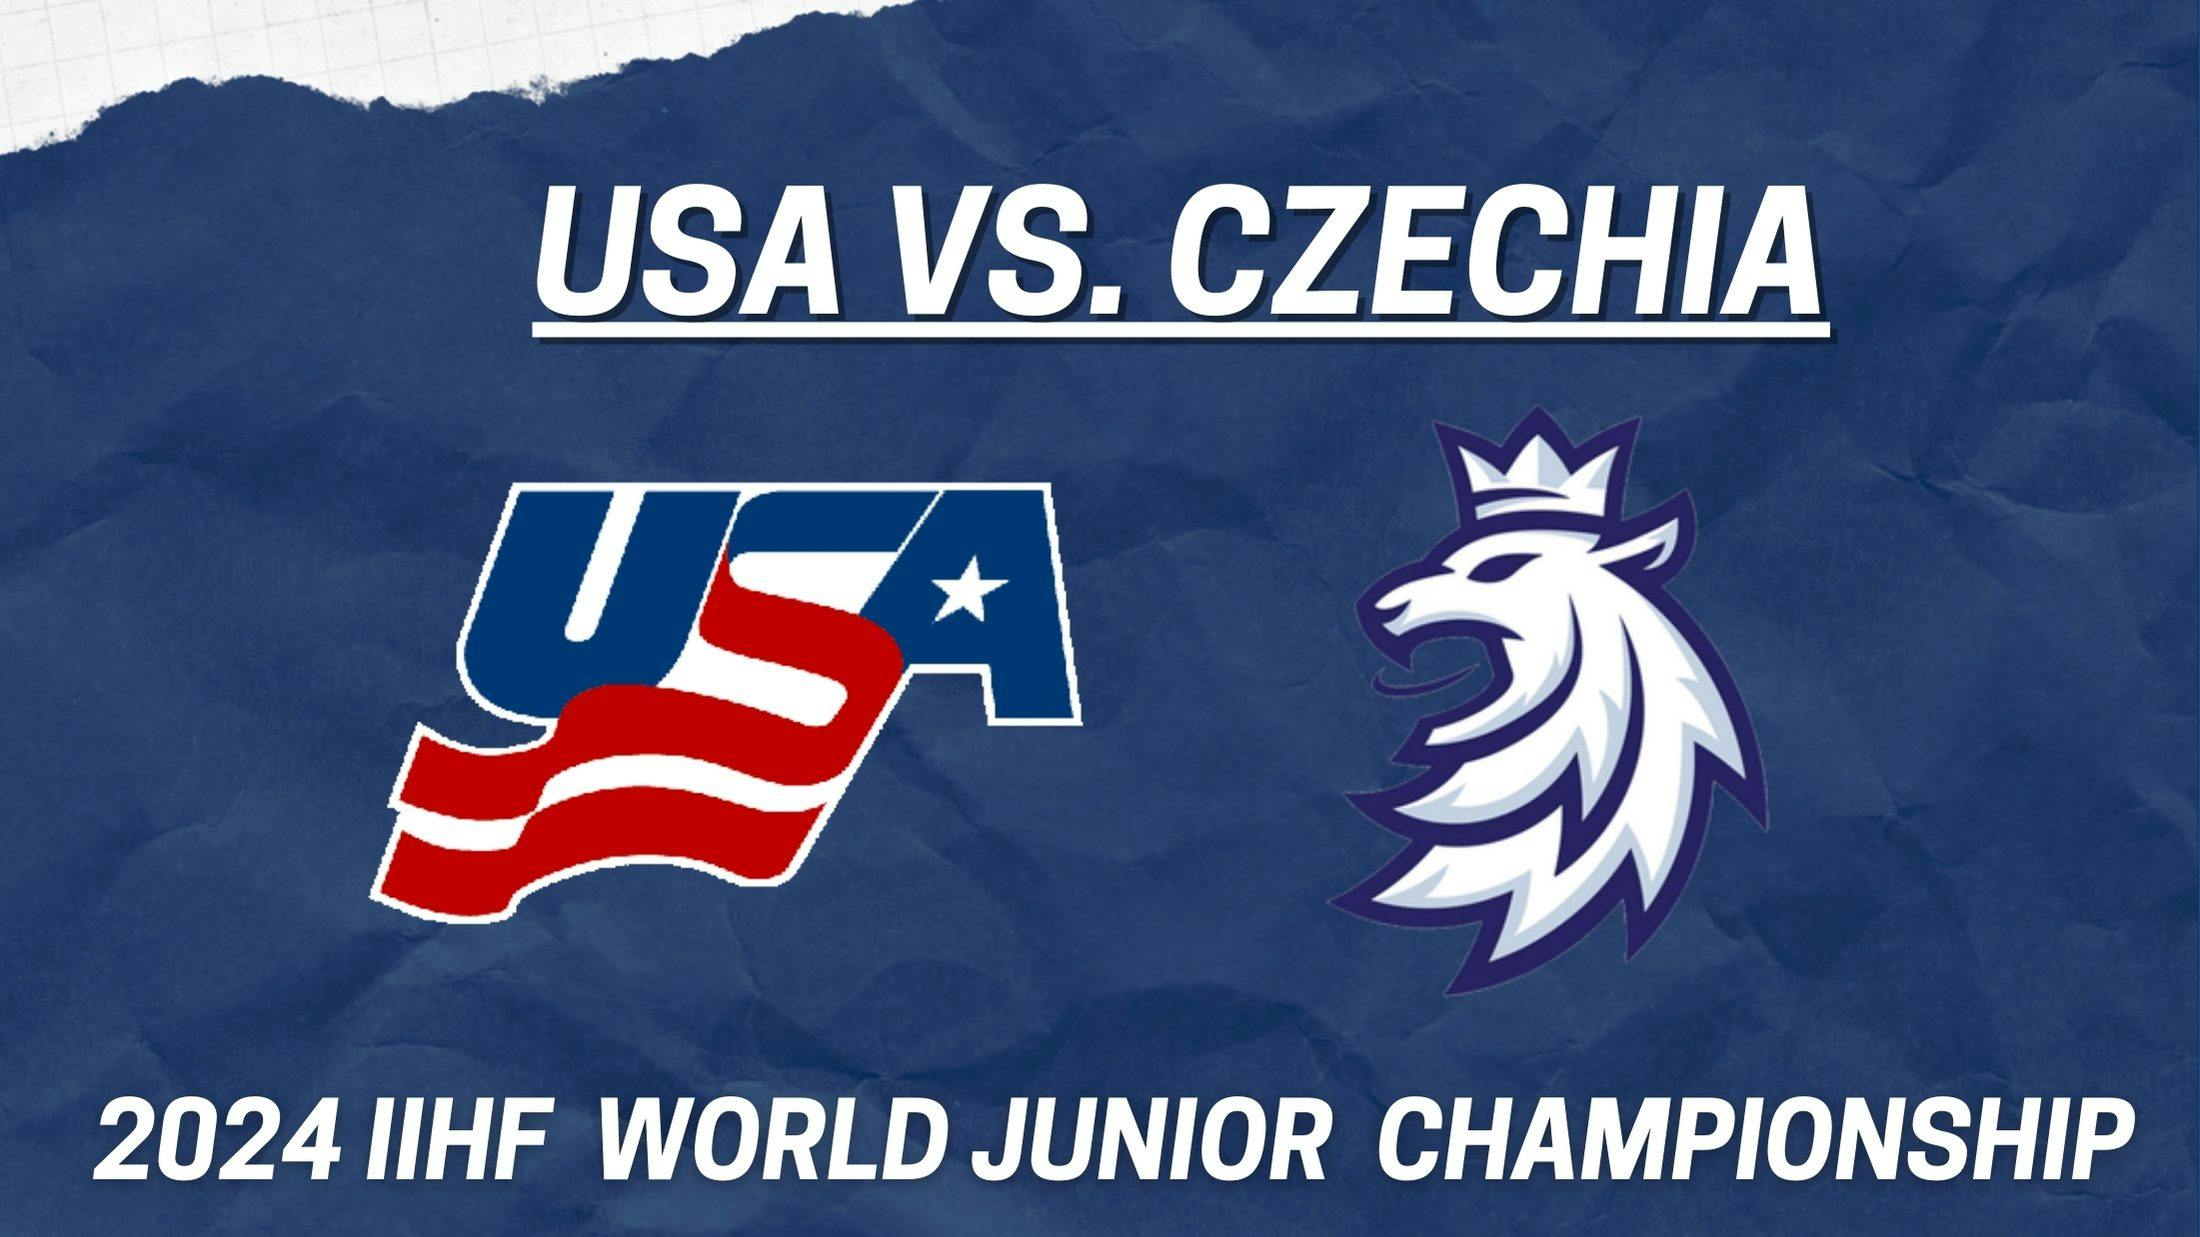 Top standouts from USA vs. Czechia at 2024 World Junior Championship